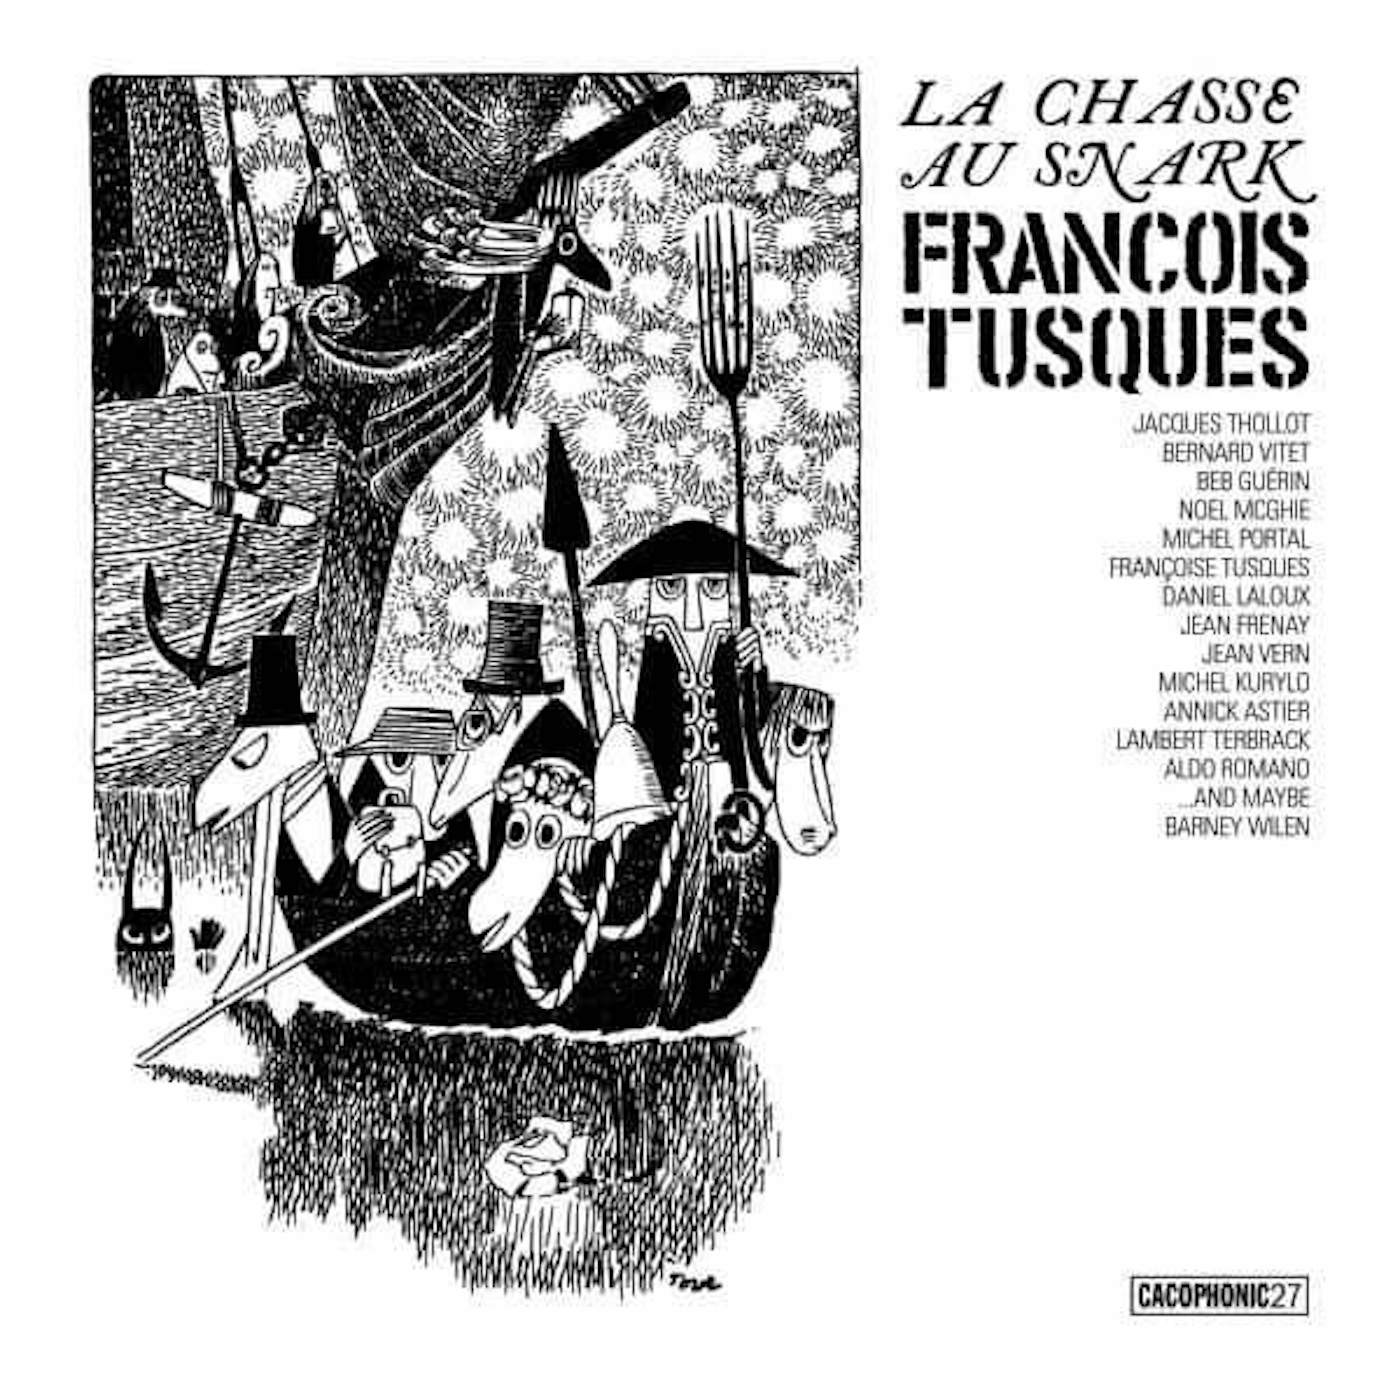 François Tusques CHASSE AU SNARK (HUNTING OF THE SNARK) Vinyl Record